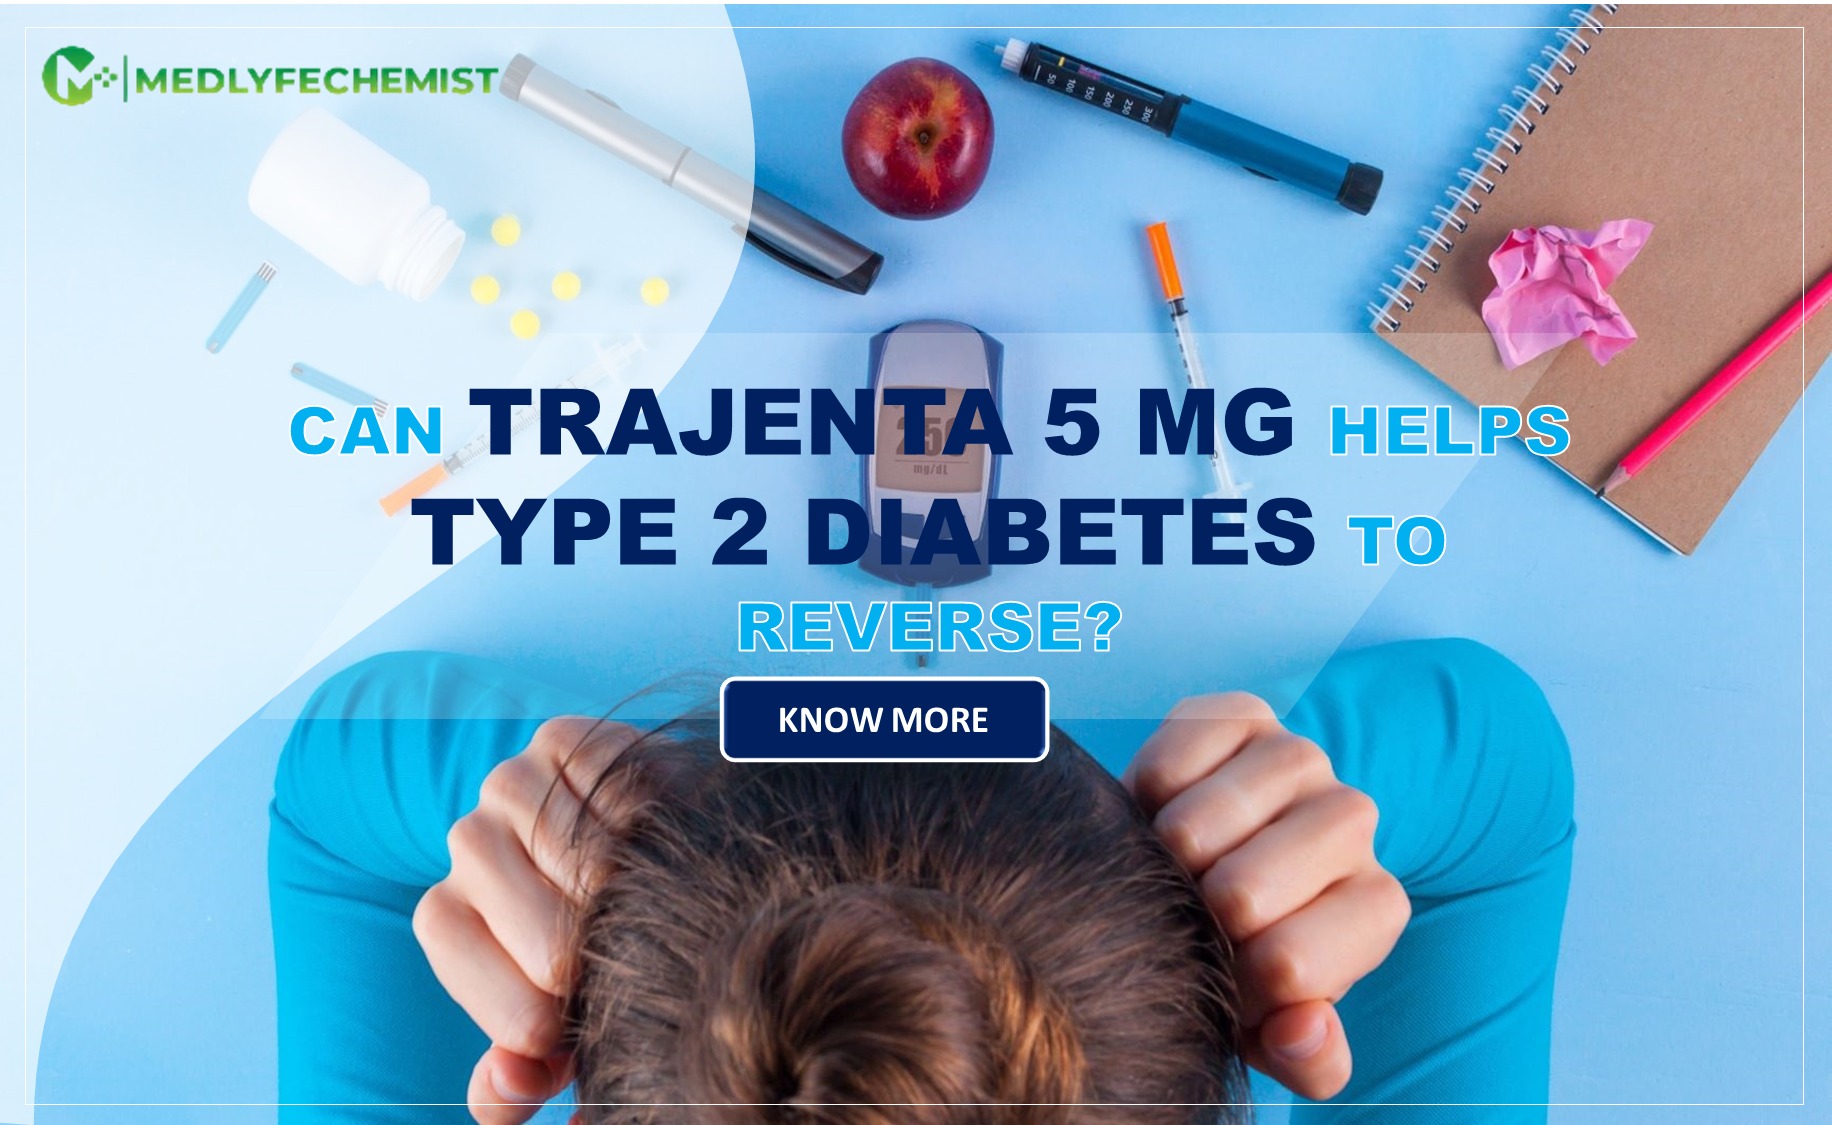 Can Trajenta 5 mg helps type 2 diabetes to reverse?